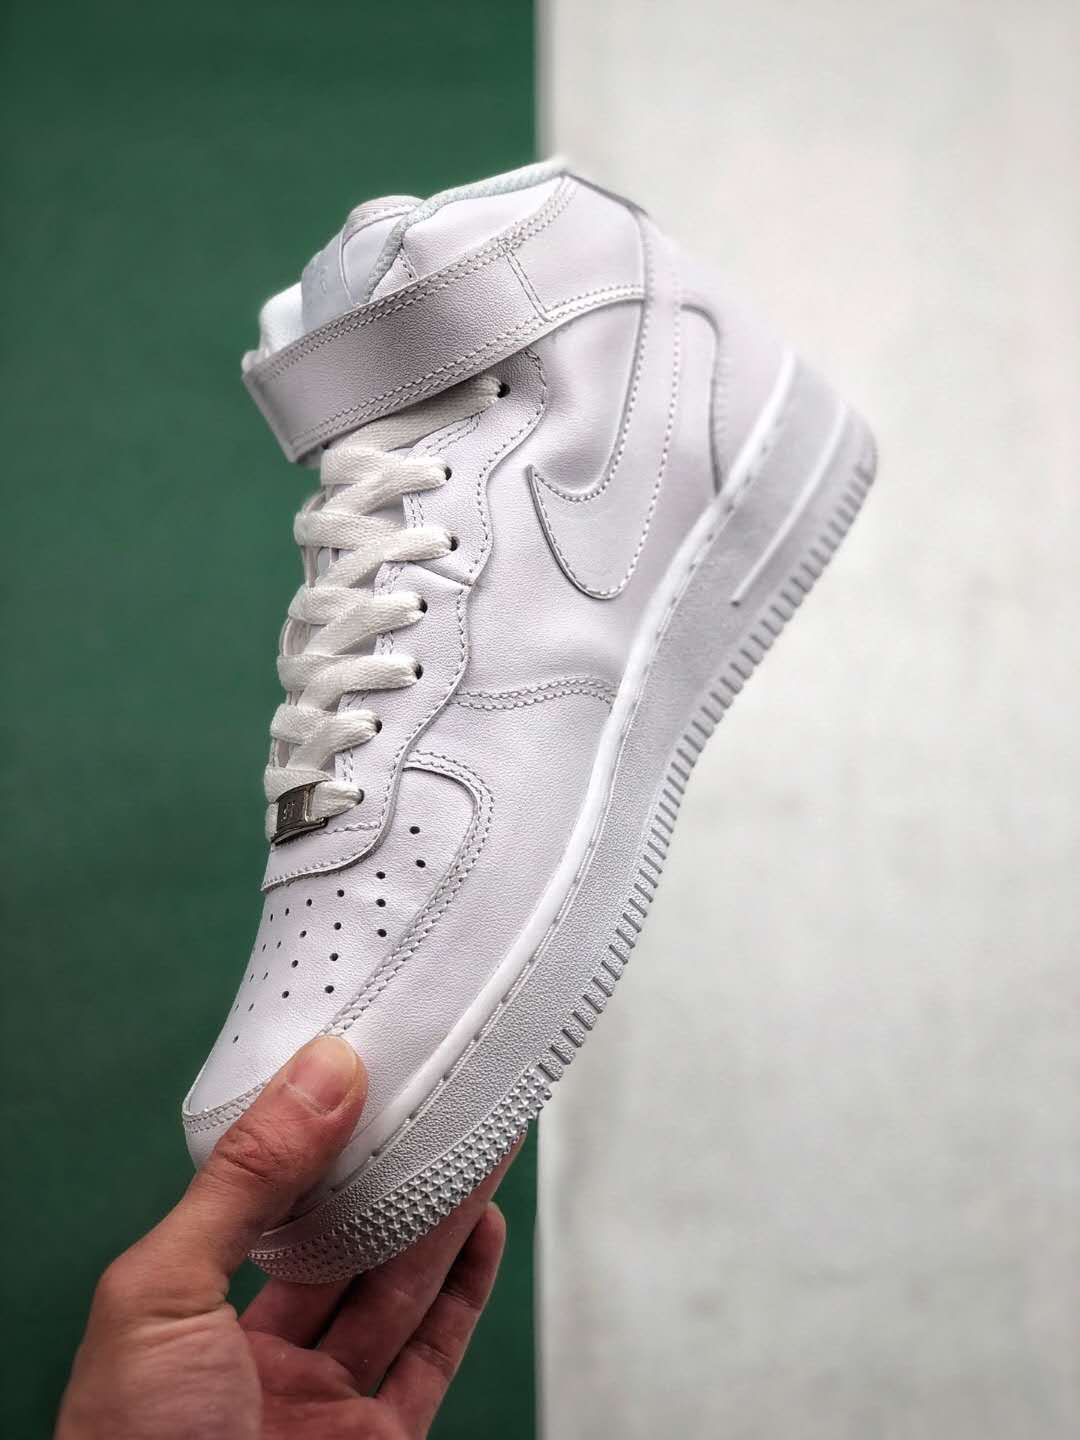 Nike Air Force 1 Mid White '07 315123-111 - Classic Sneakers that Elevate Style